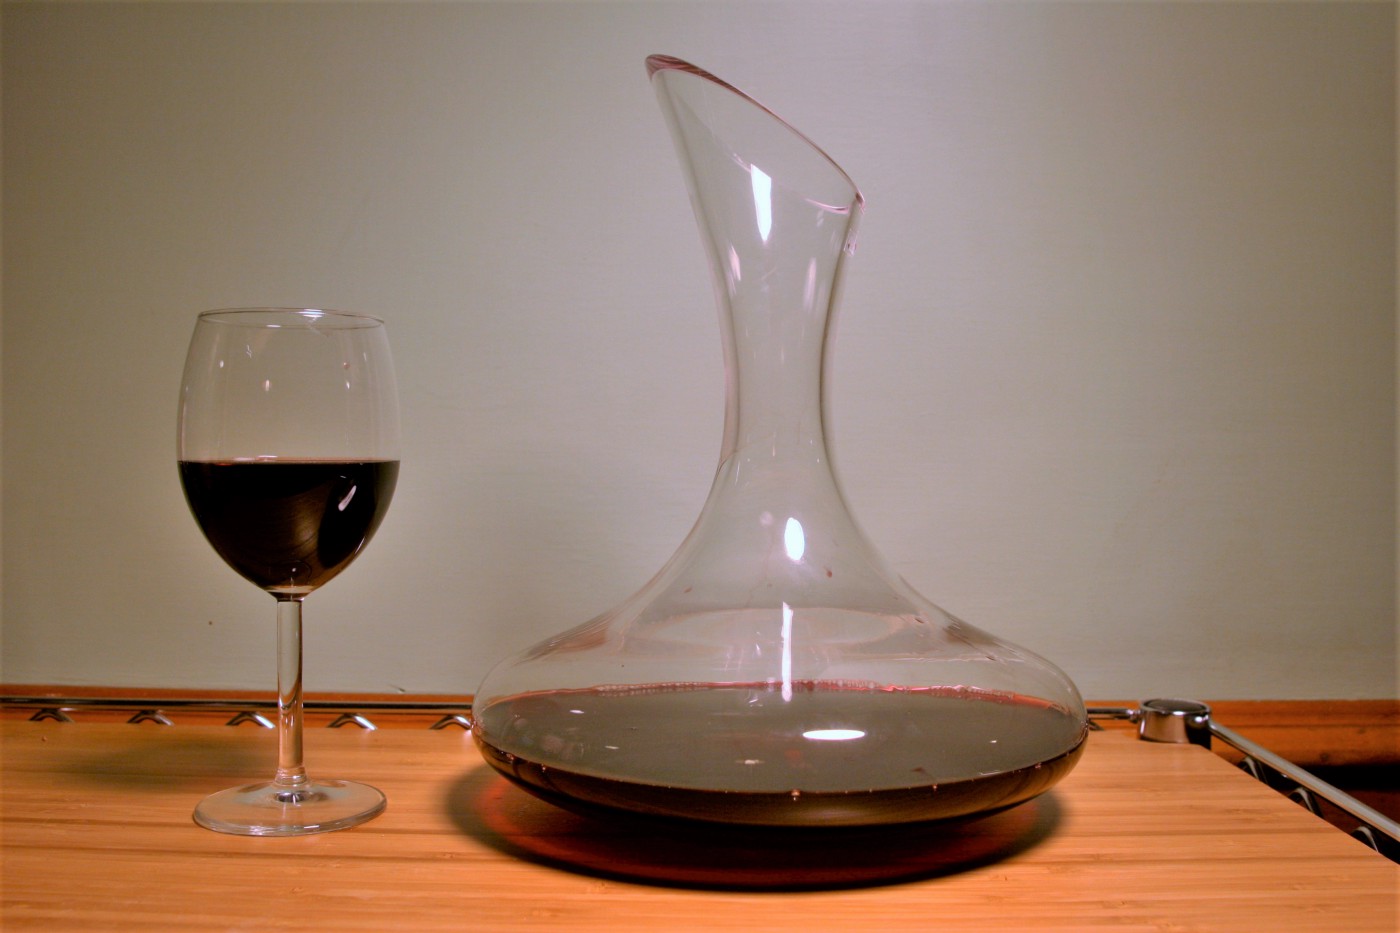 Red wine in a glass and decanter